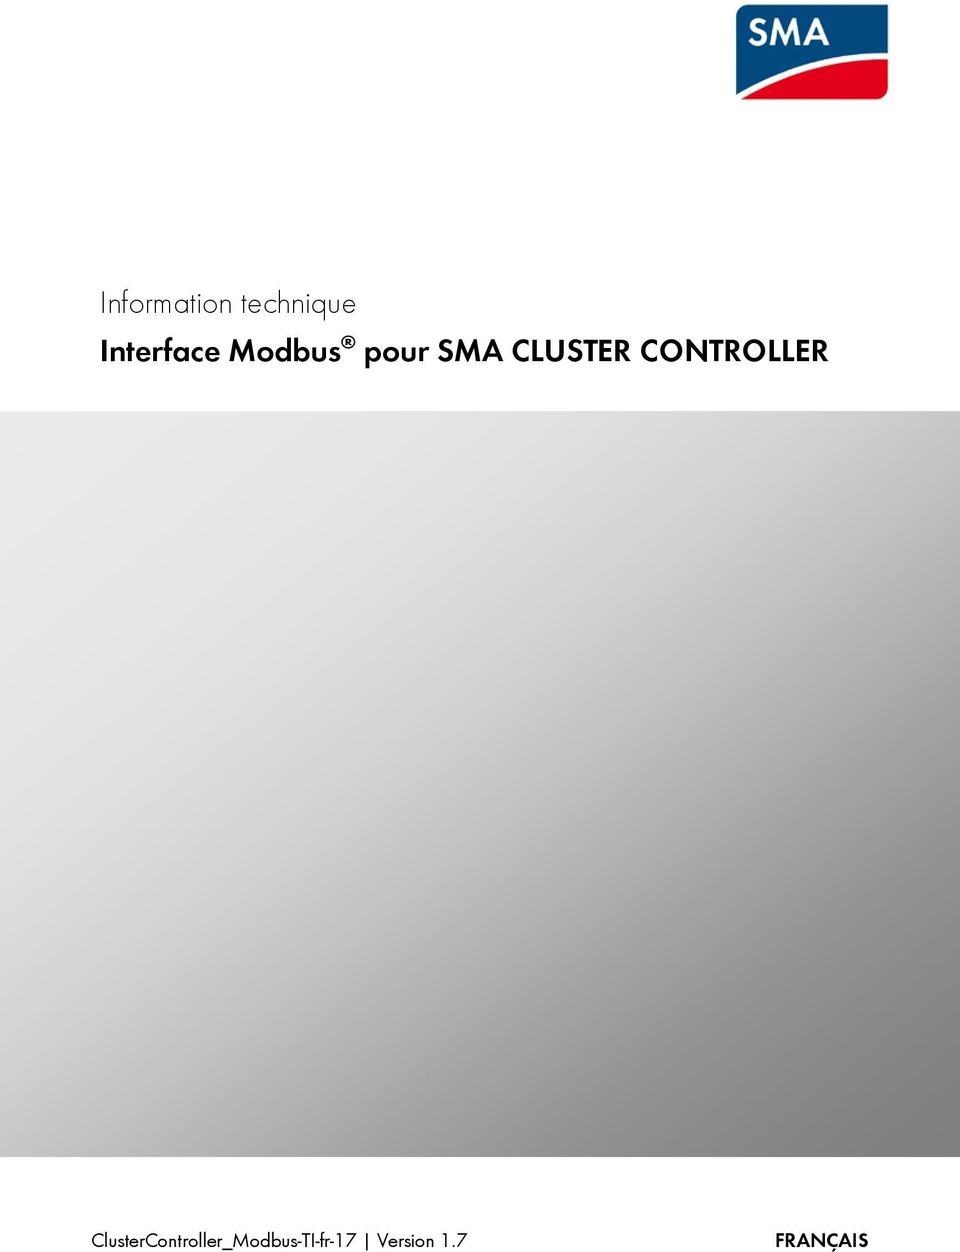 CLUSTER CONTROLLER